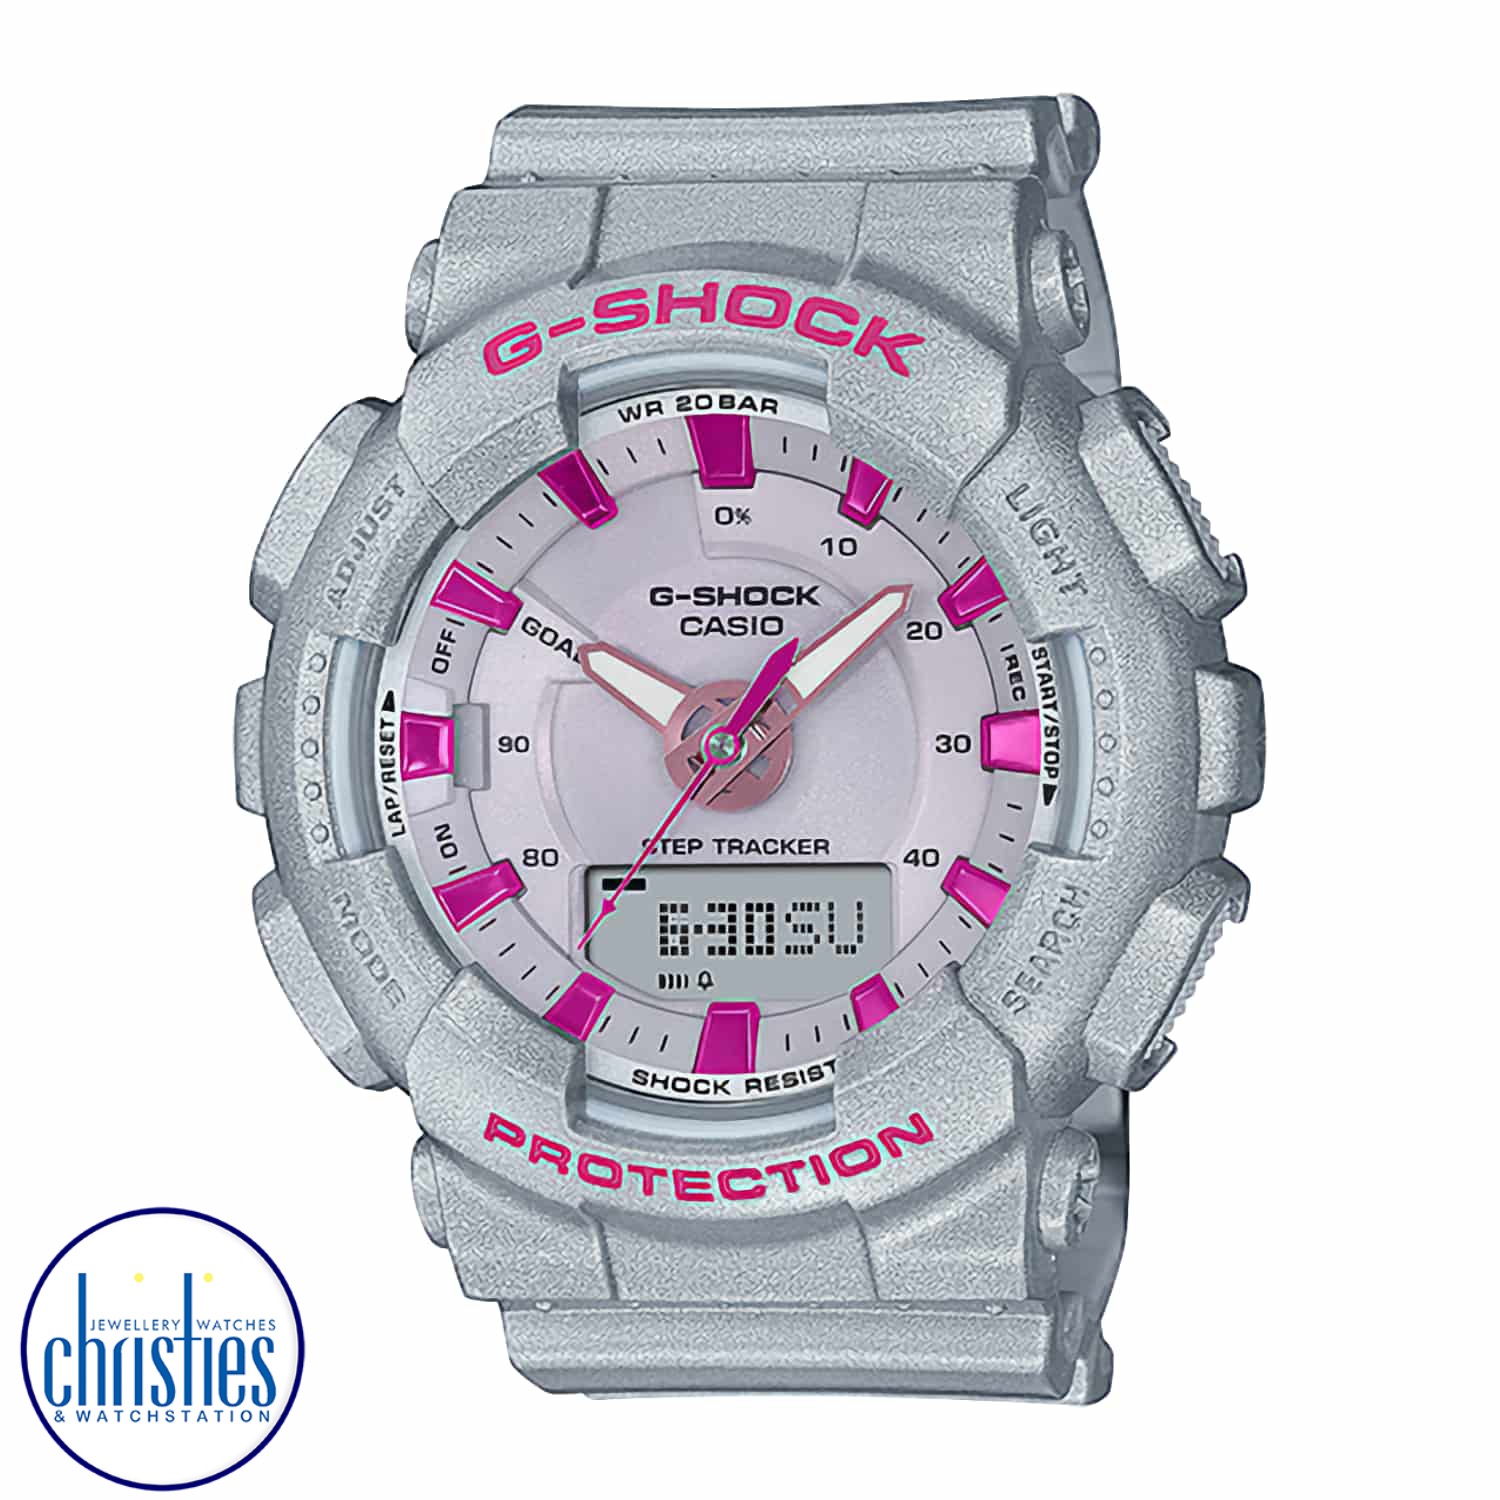 GMAS130NP-8A G-SHOCK Womens Neo Punk Watch. Casio brings punk fashion to the ever-popular analog-digital G-SHOCK line, in four compact designs.  Punk glam meets pastel with loads of flashy metallic colour and studs offset by softer hues for the case, band